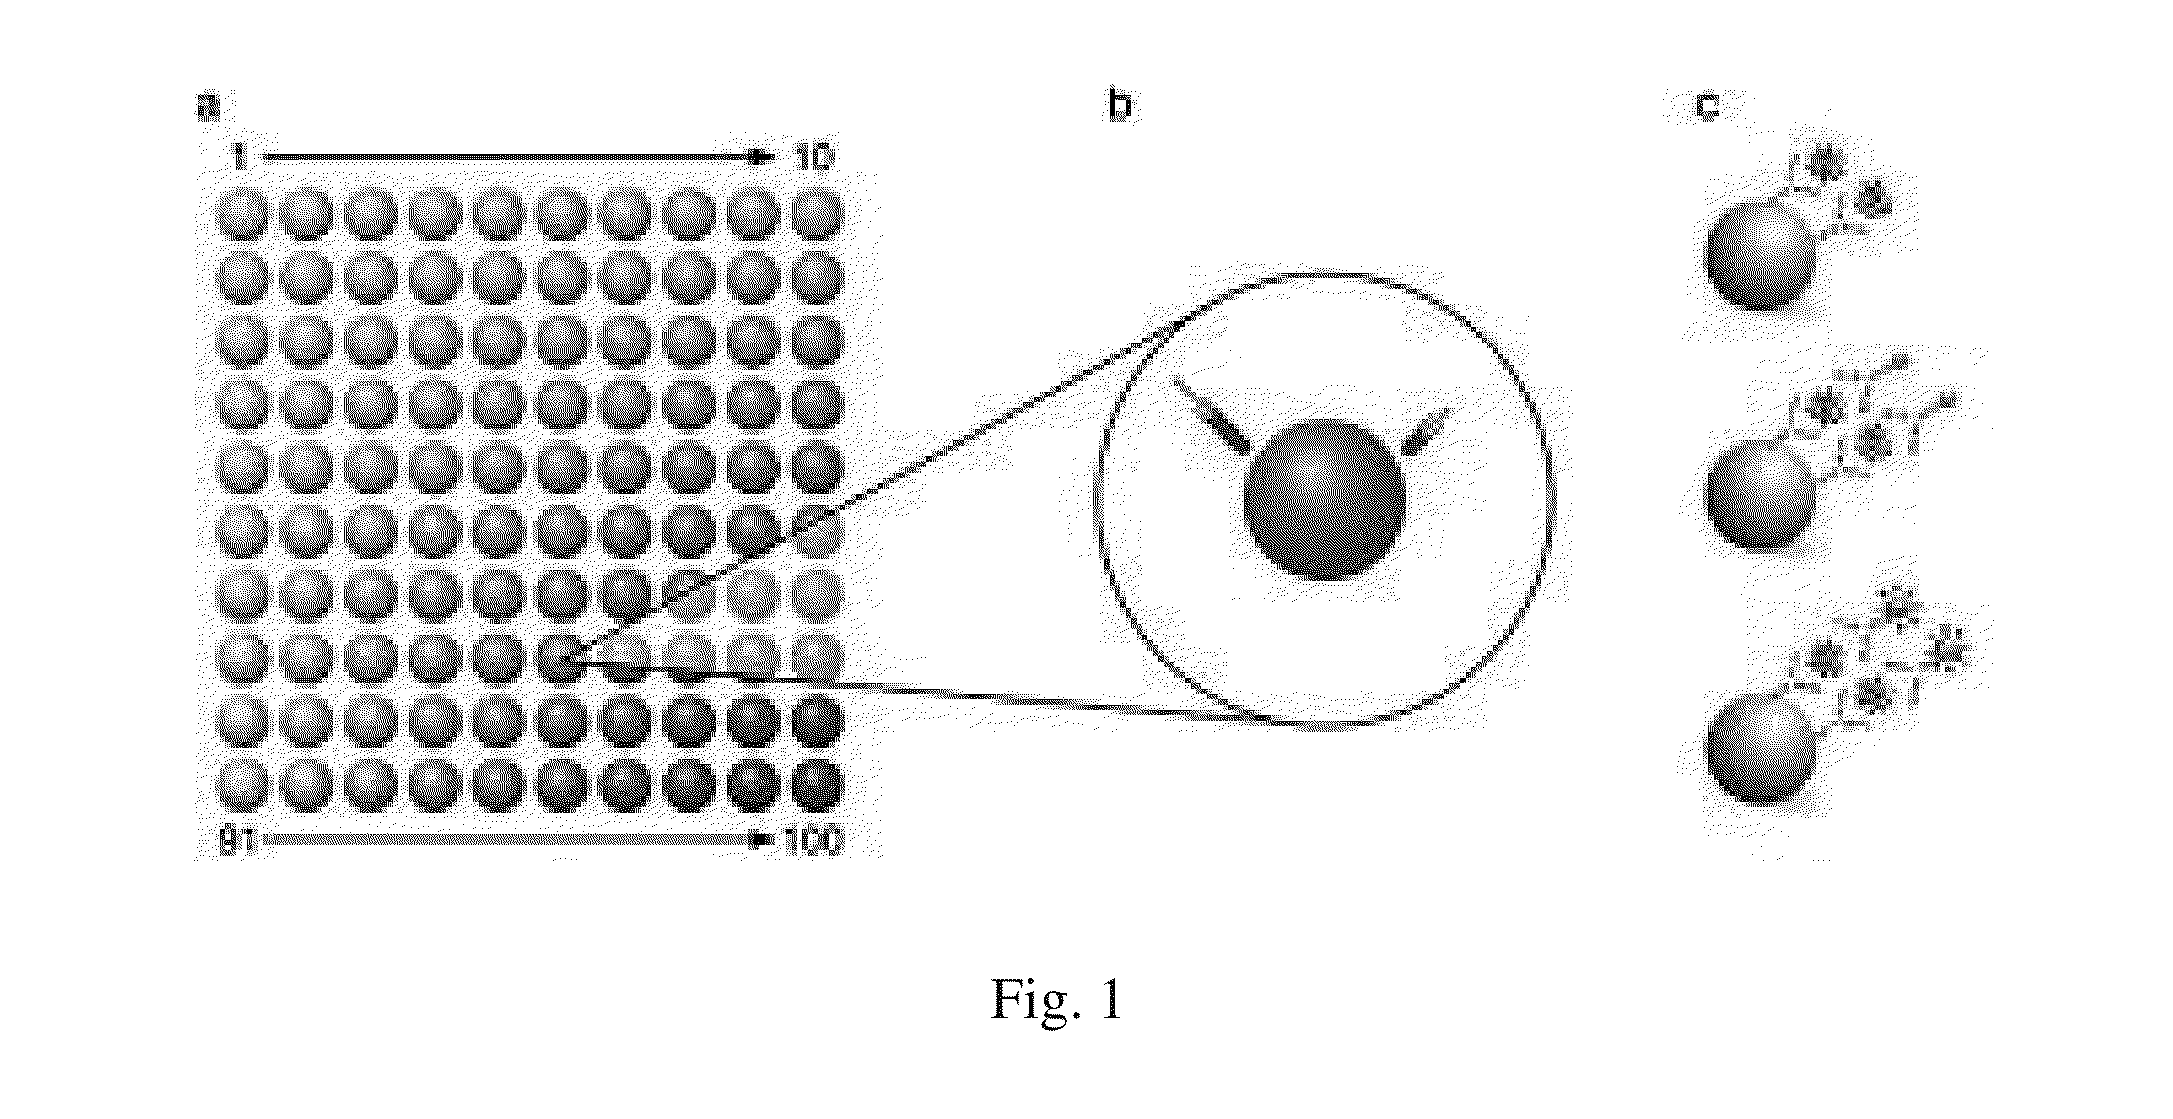 Acoustic microreactor and methods of use thereof